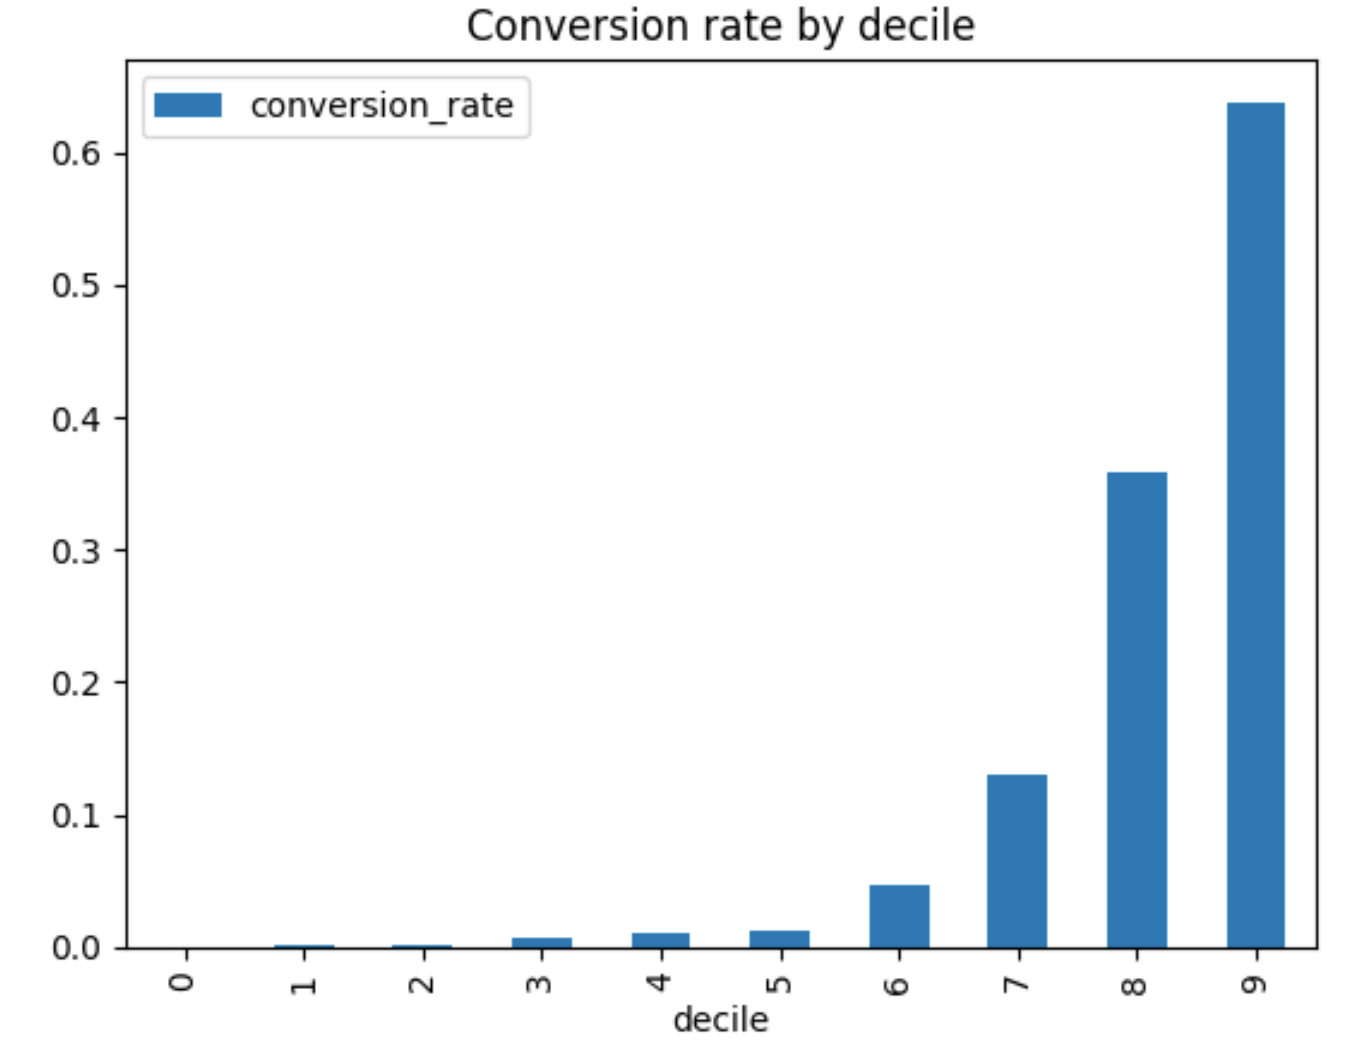 Bar chart showing conversion rate by decile. The x axis is deciles 0 through 9, 9 having the largest bar chart (highest conversion), 0 having none. 